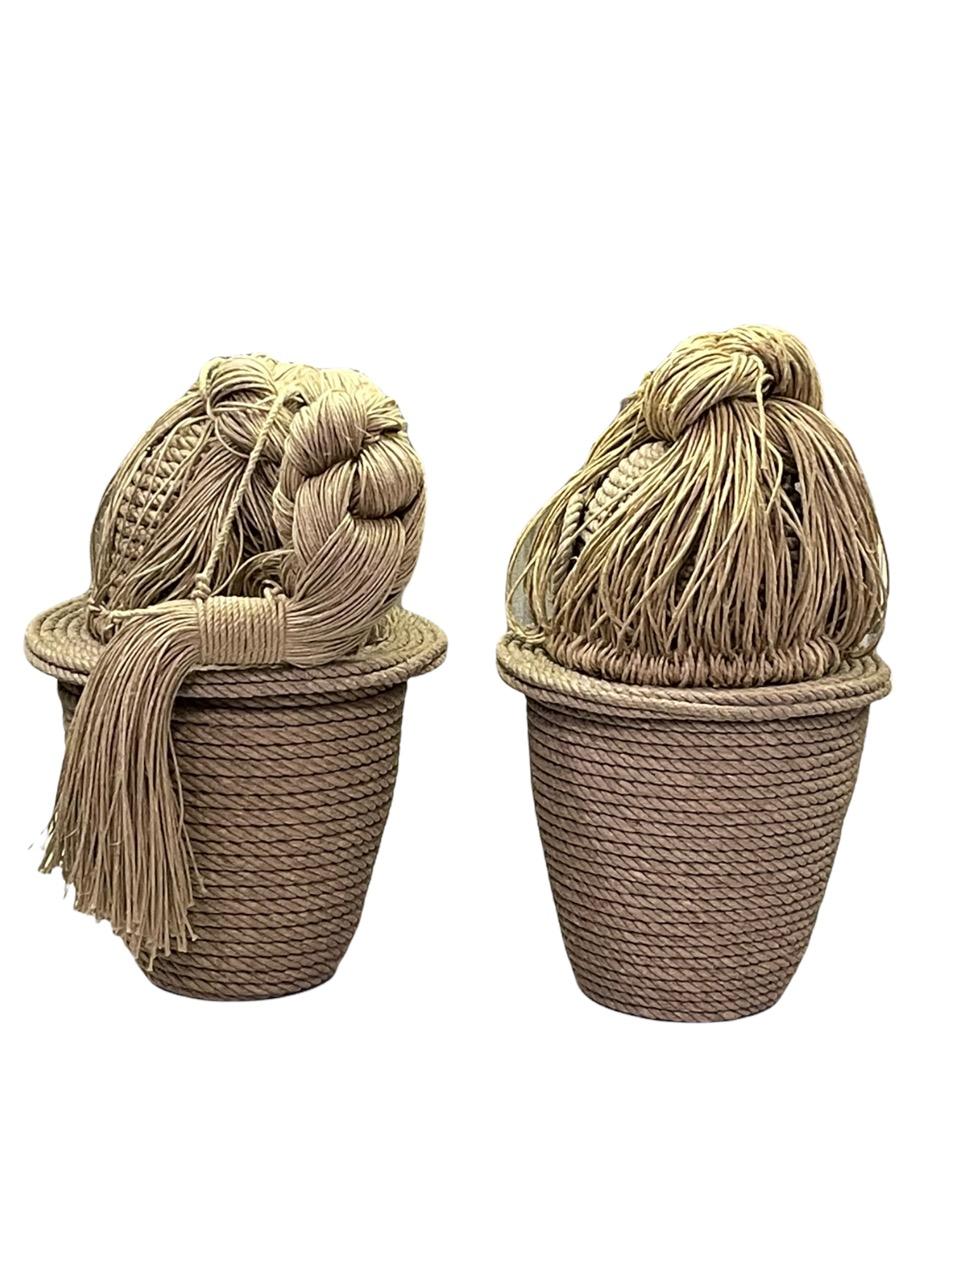 Pair of Contemporary 21st Century French Christian Astuguevieille Jute Rope Co For Sale 1